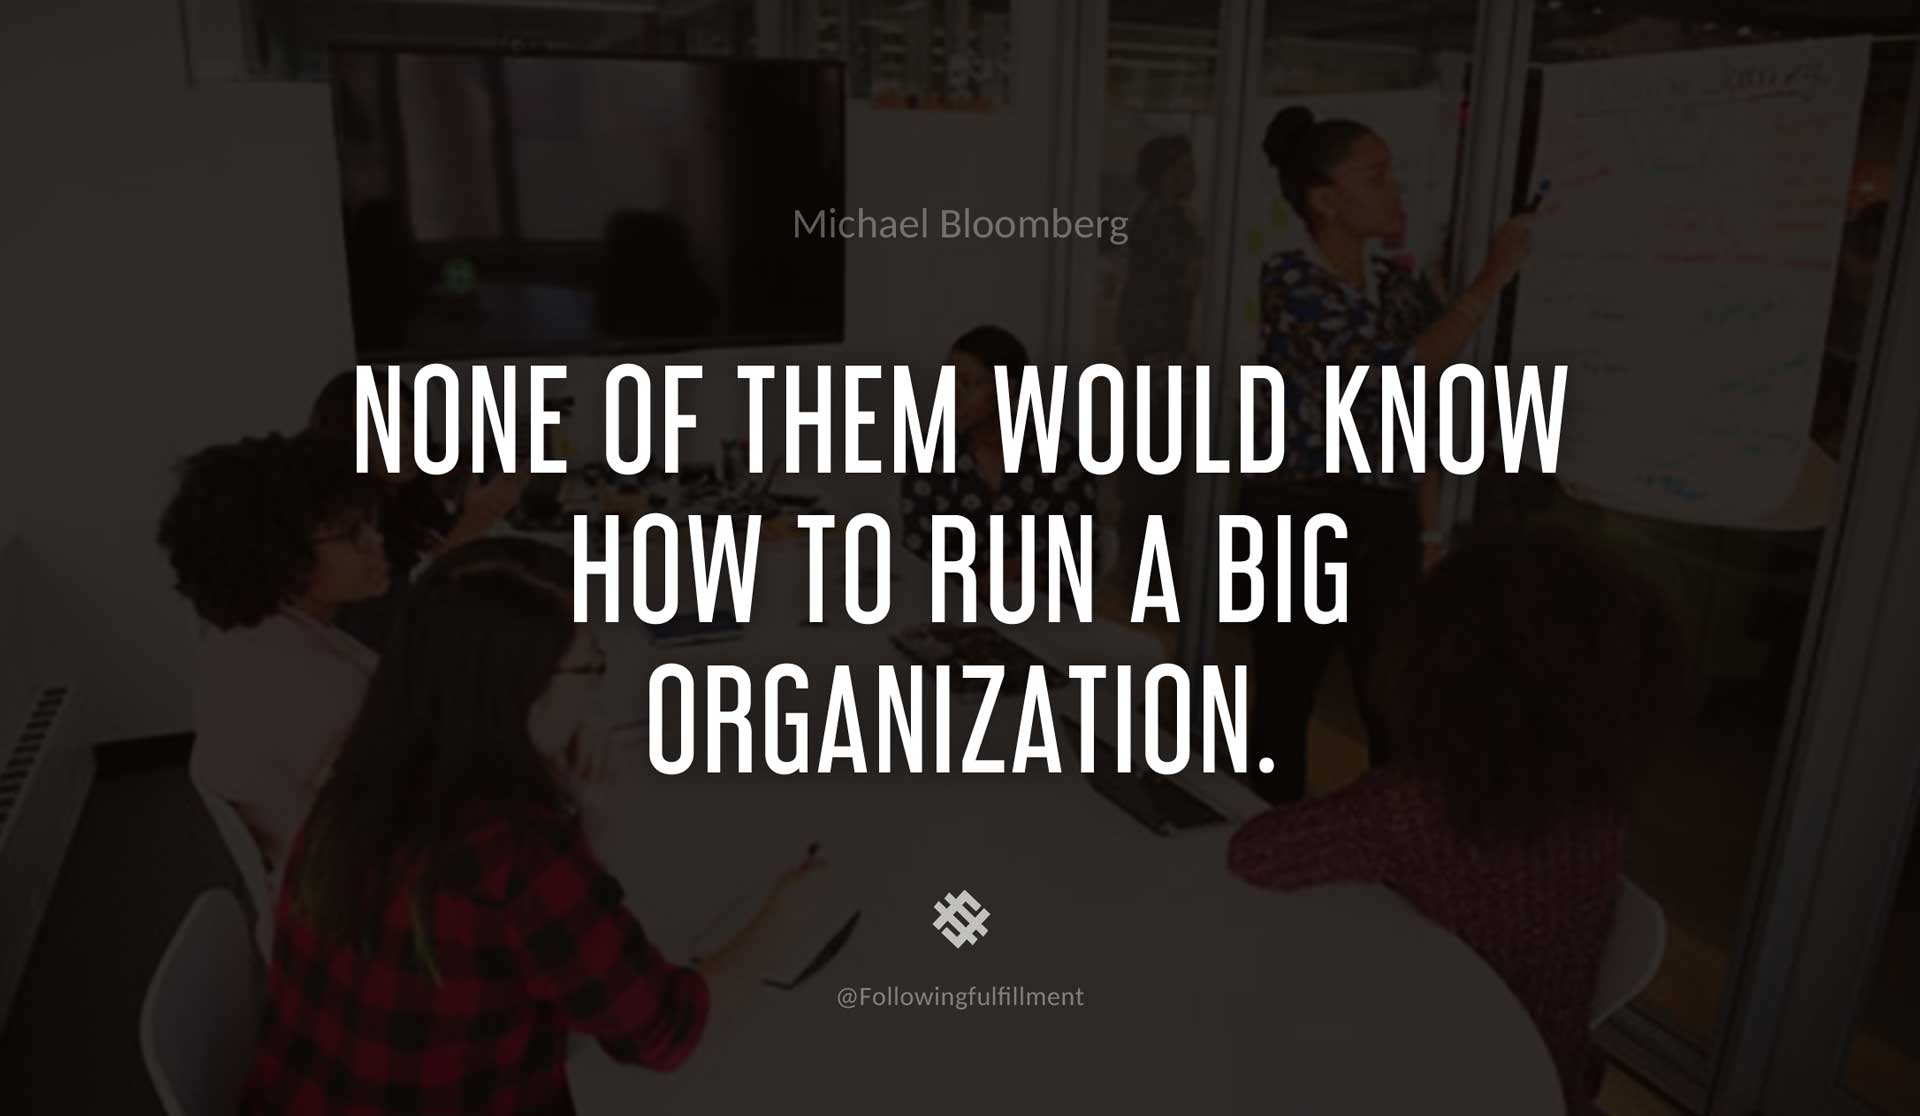 None-of-them-would-know-how-to-run-a-big-organization.-MICHAEL-BLOOMBERG-Quote.jpg